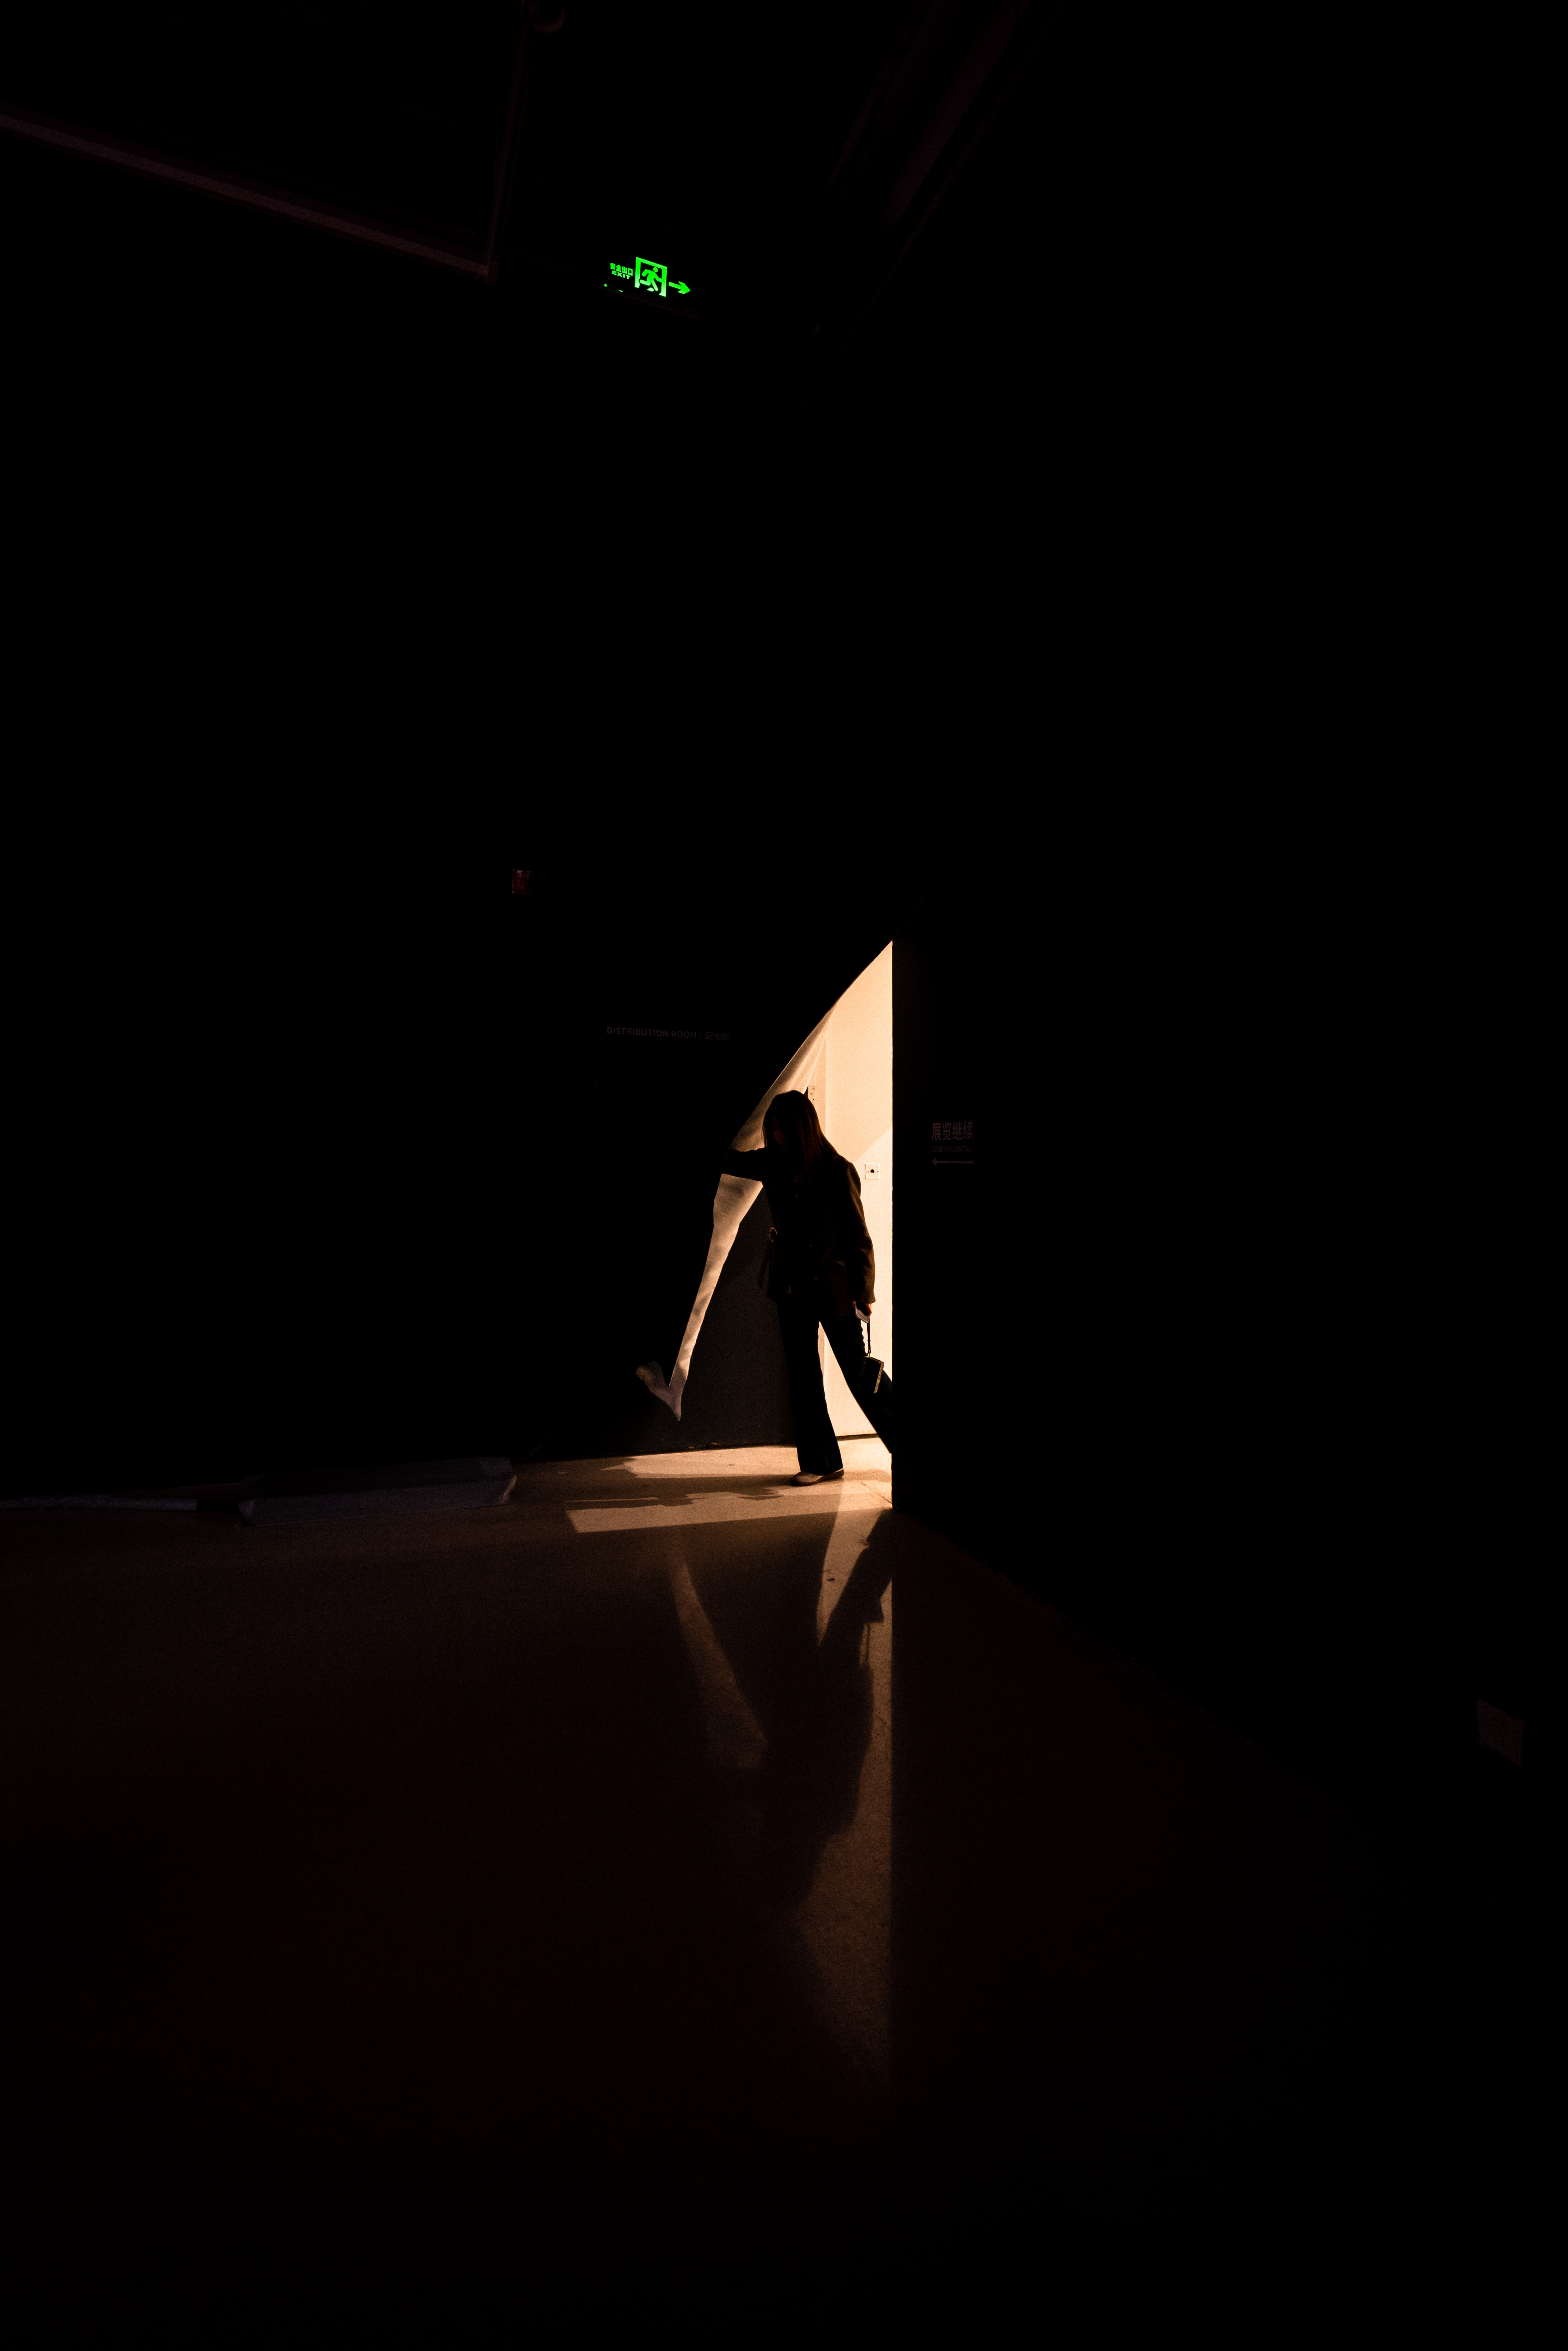 darkness, dark, shine, light, silhouette, human, person, output, exit